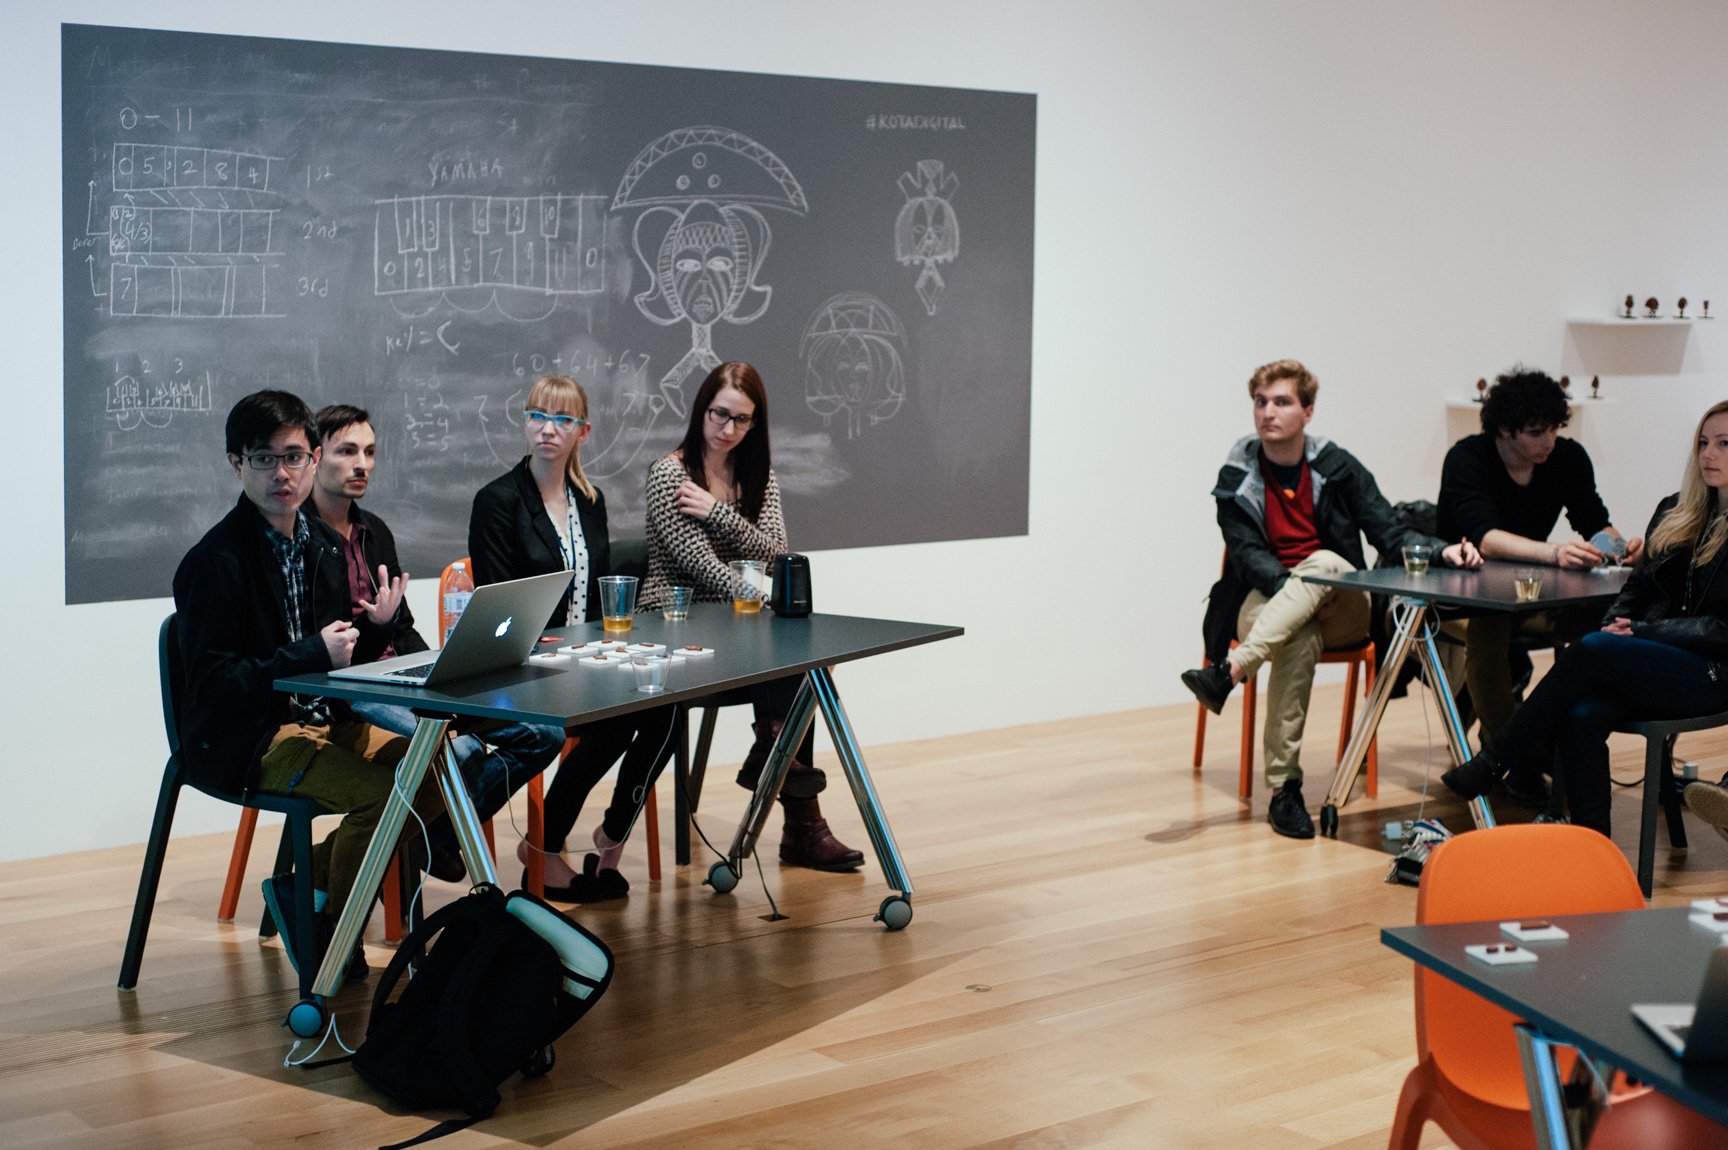 Collaborators attend a presentation in the Lower-West Gallery for a 3-D printing workshop.